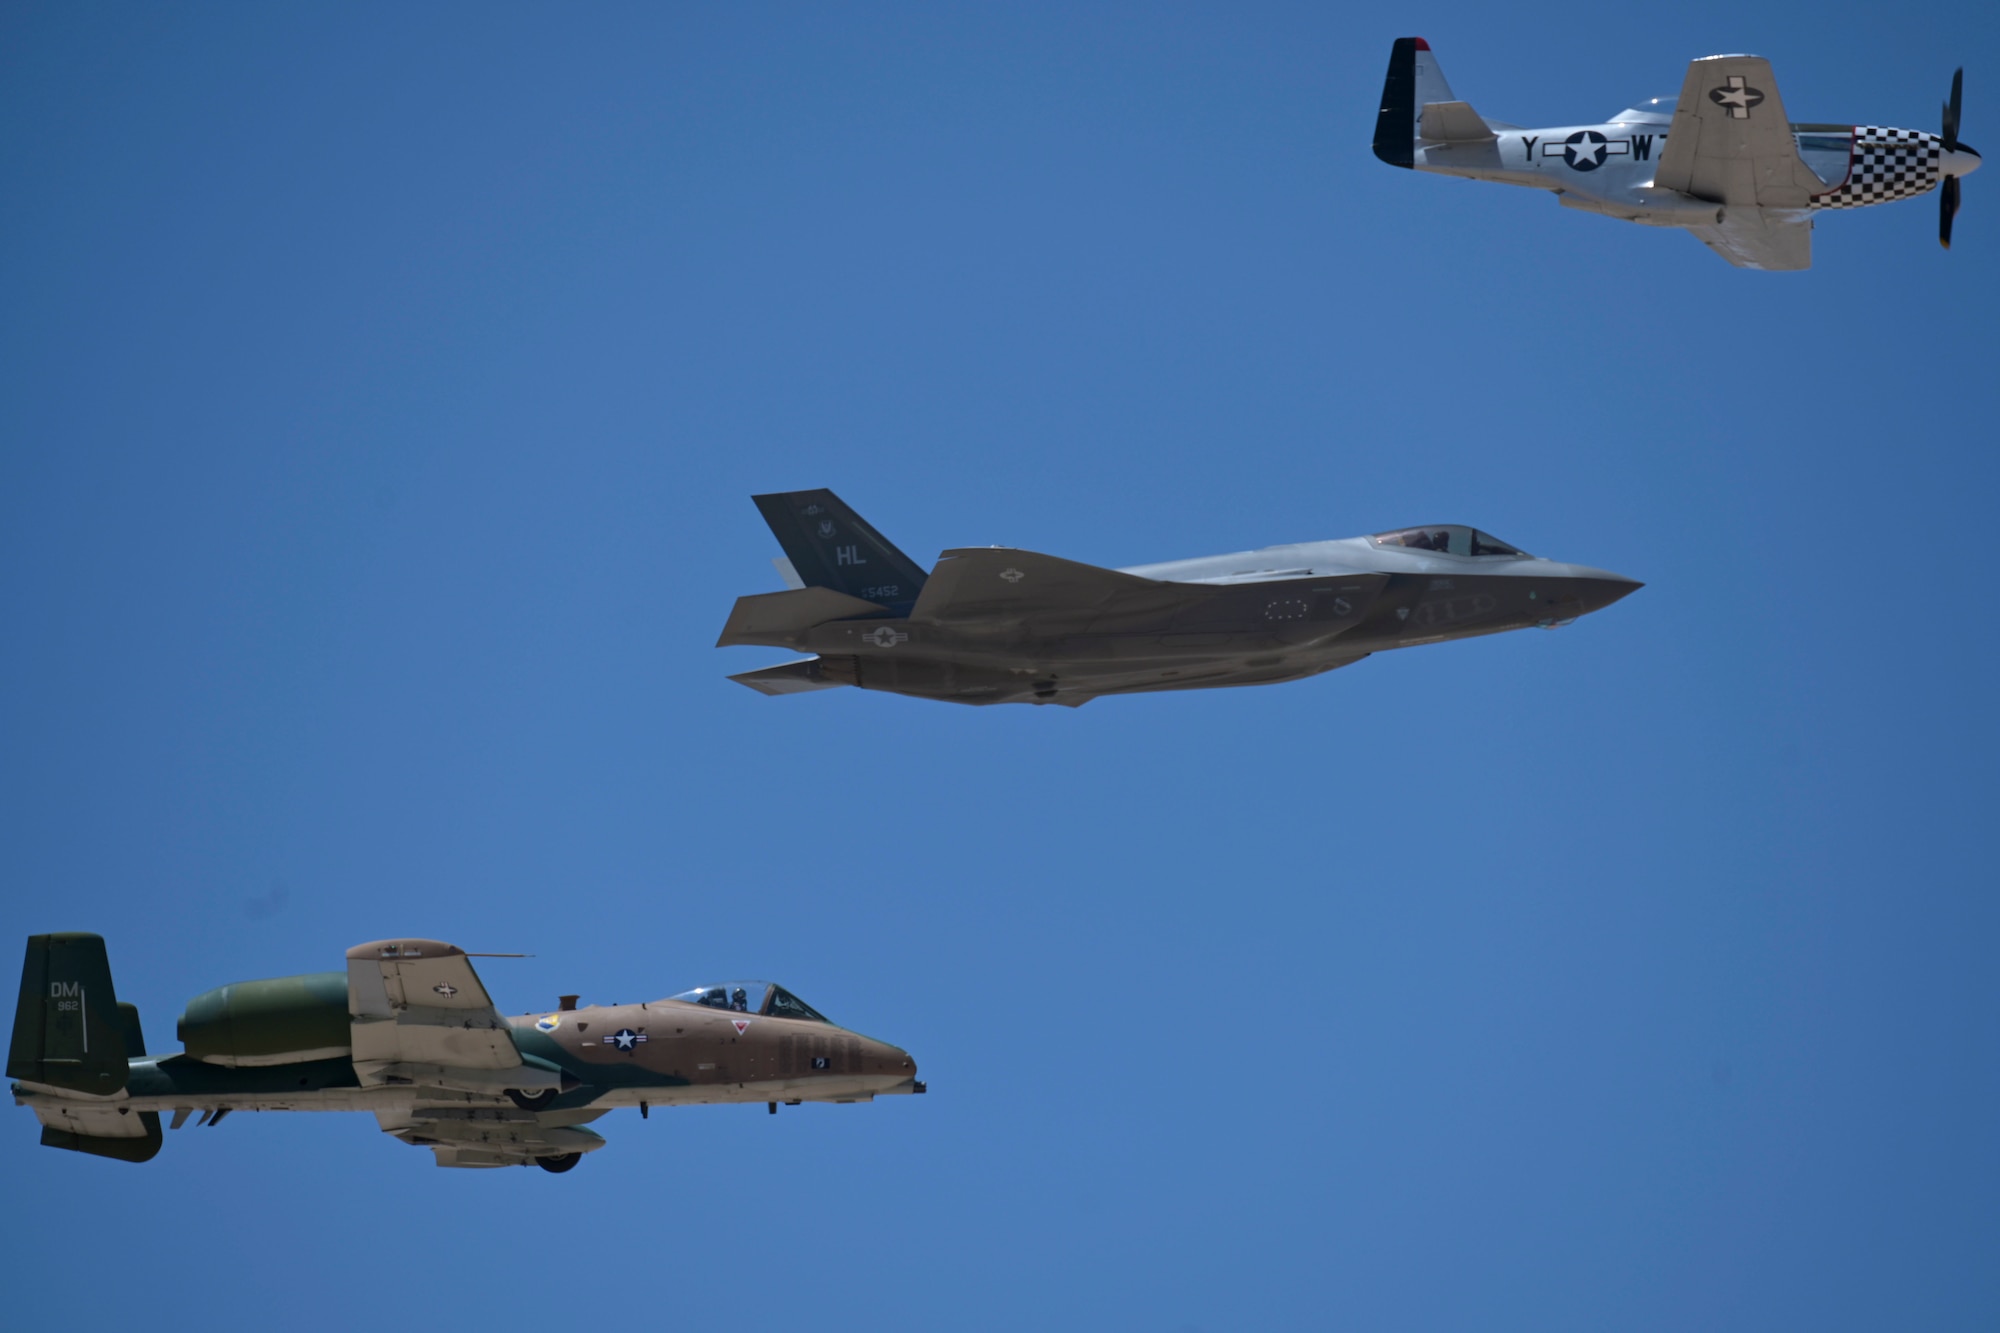 An F-35A Lightning II, from Langley Air Force Base, Virginia; an A-10C Thunderbolt II, from Davis-Monthan Air Force Base, Arizona; and a P-51 Mustang, take flight at the 2022 Holloman Legacy of Liberty Air Show and Open House, May 7, 2022, on Holloman Air Force Base, New Mexico. The aircraft took part in a Heritage flight that paid homage to various generations and the fighter aircraft that embodied the standard for that time. (U.S. Air Force photo by Airman 1st Class Antonio Salfran)